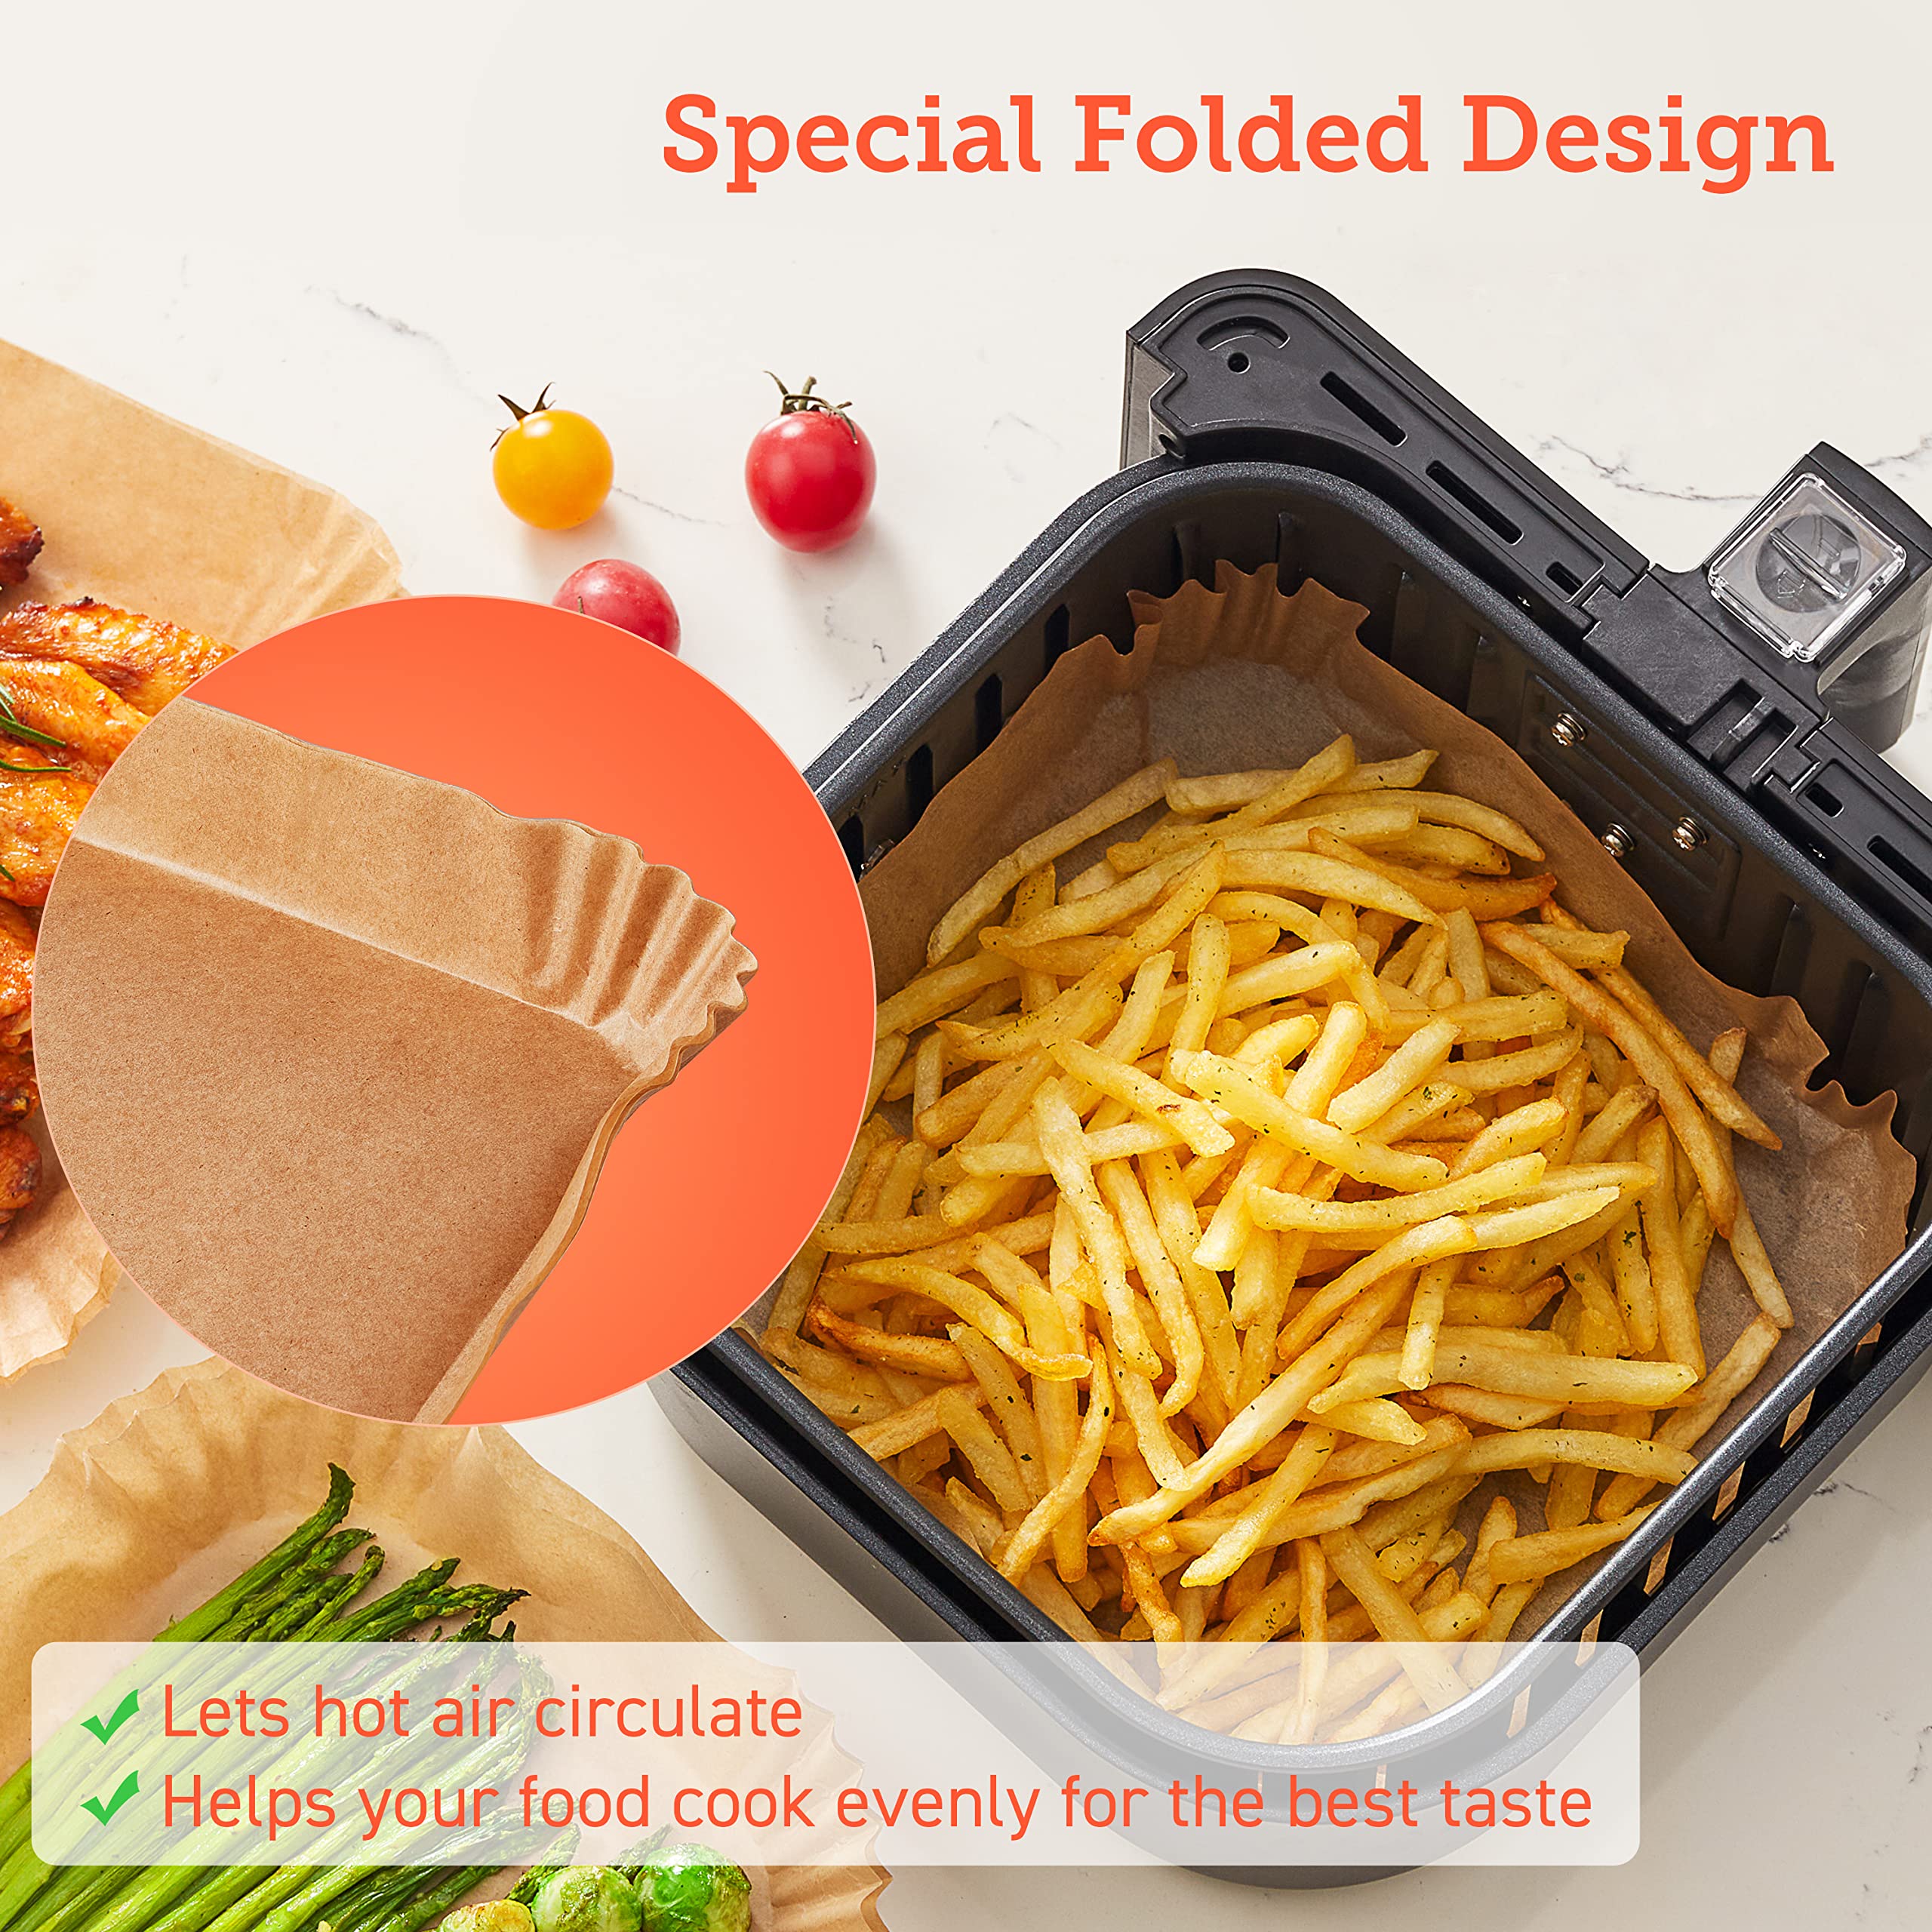 COSORI Air Fryer Liners, 100 PCS Square Disposable Paper Liners, Non-Stick Silicone Oil Coating, Little to No Cleaning, 7.9